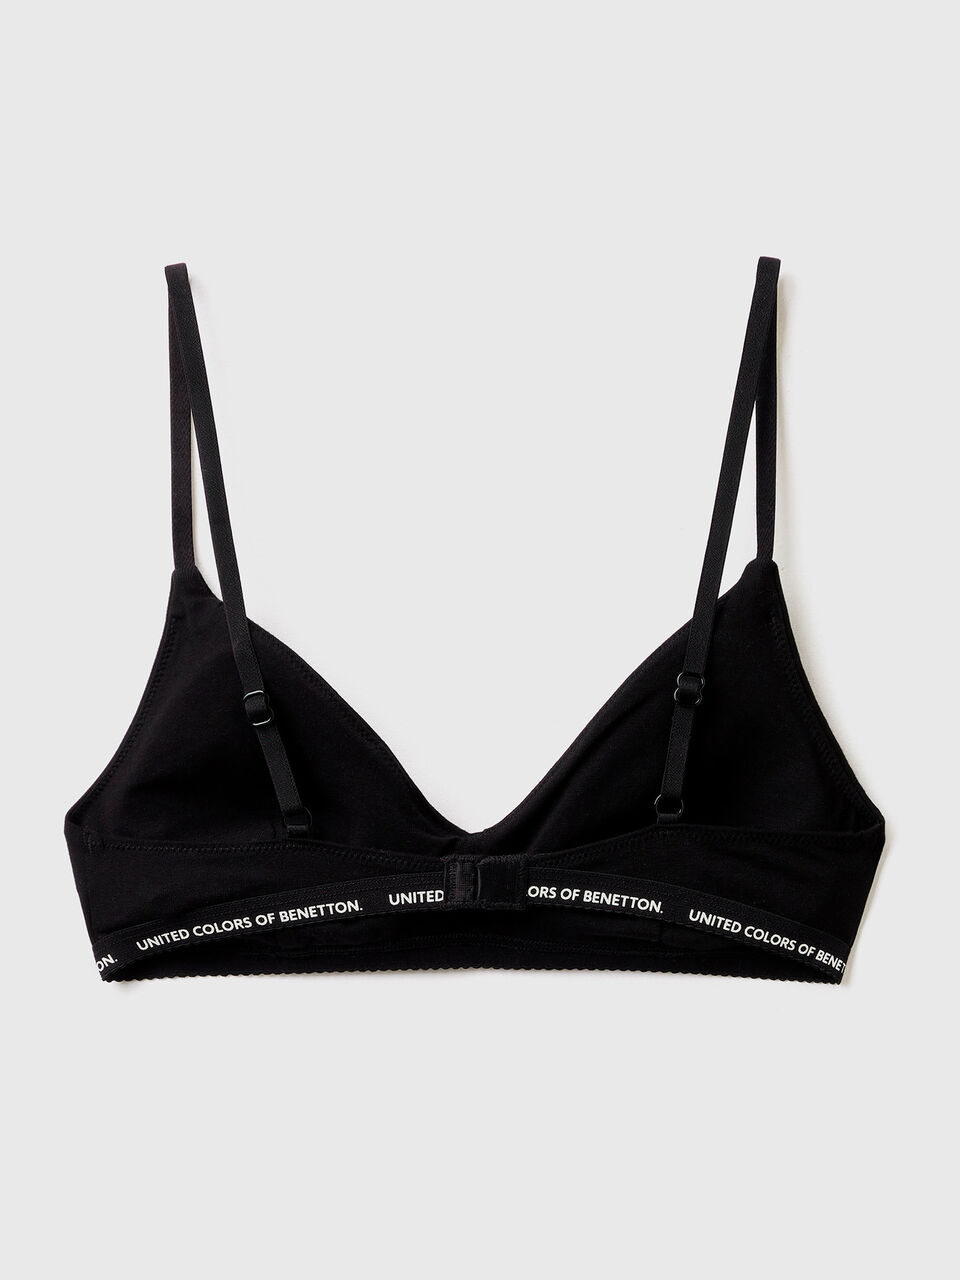 Buy JZMEE WomenGirls Front Open Black Colored Pack of 1 Bra, Cotton Blend  Bras in b-Cup Size, Perfectly Comfotable as per The Size, A Rare and  Stylish Look, Easy to wear for